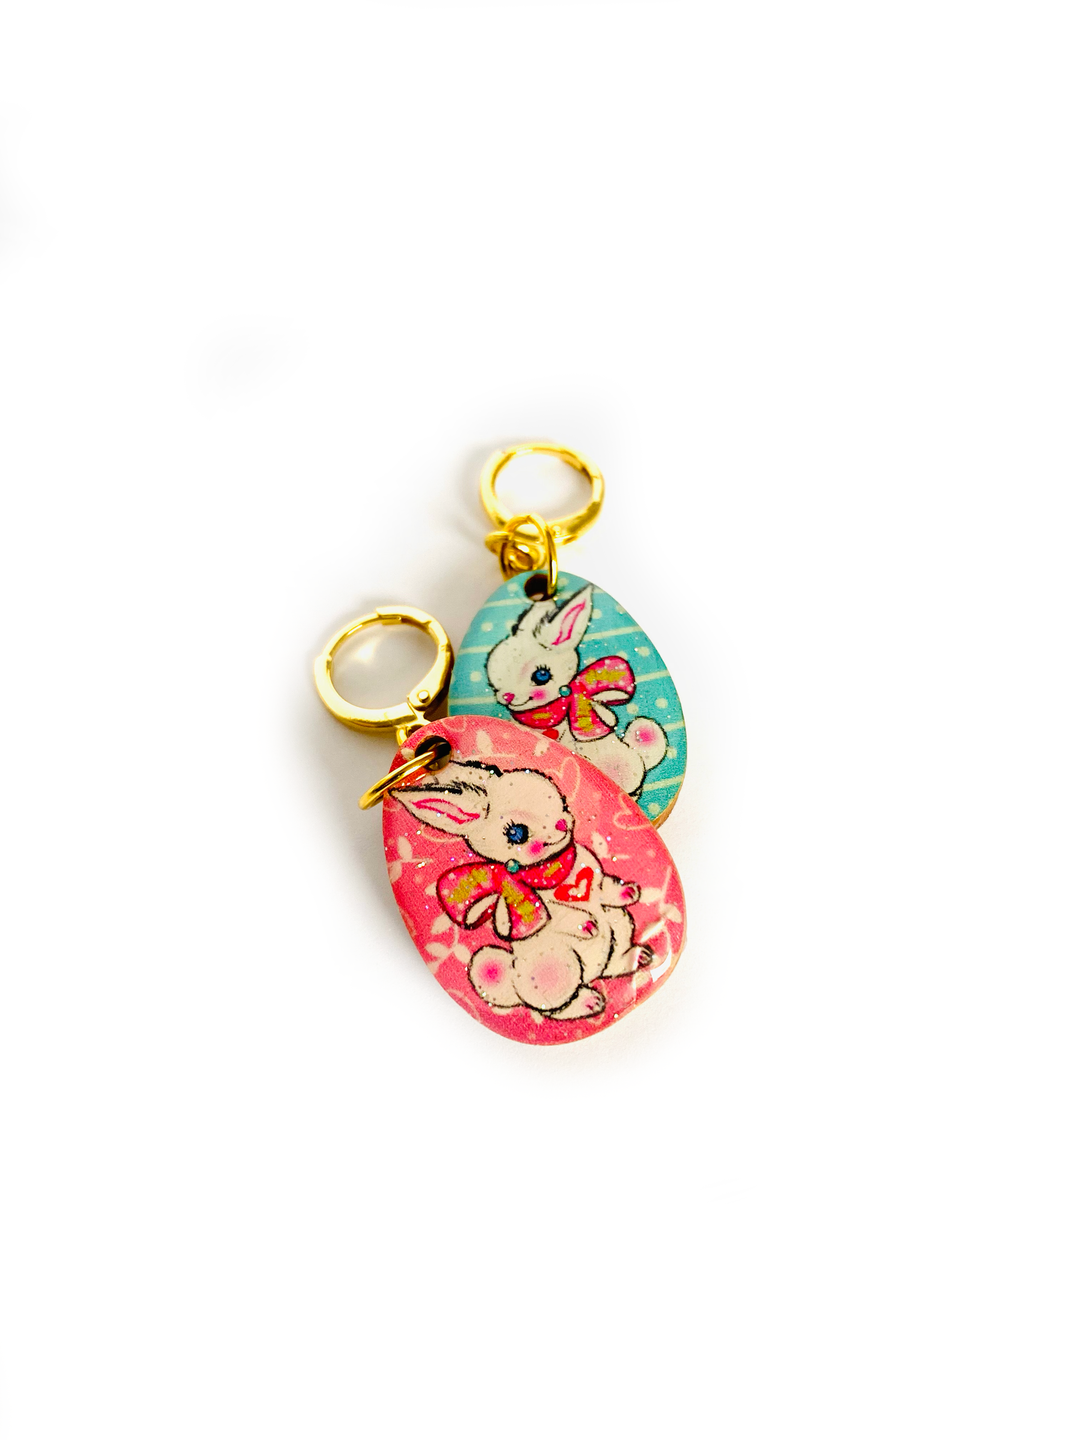 Layla Bunny Easter Egg Earrings by Rosie Rose Parker